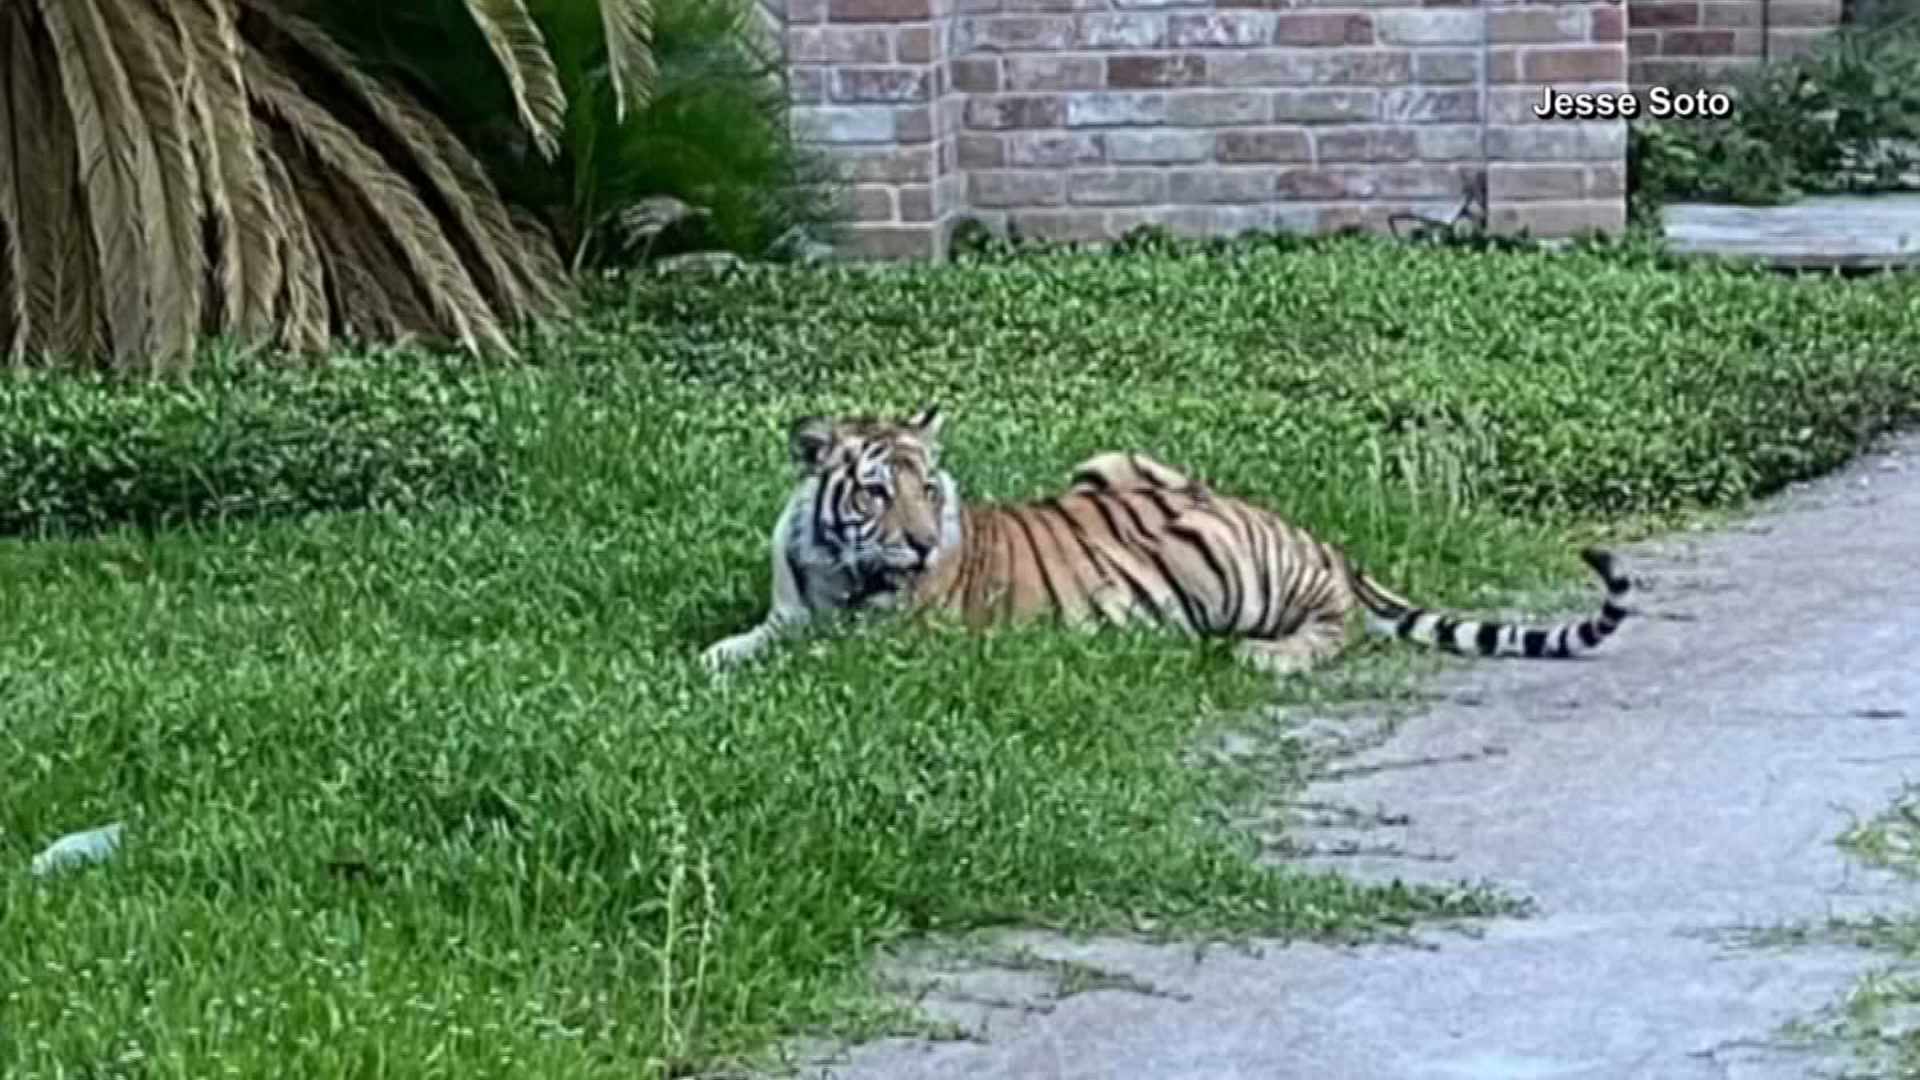 Texas Tiger Still on the Lam as Alleged Owner Freed on Bond